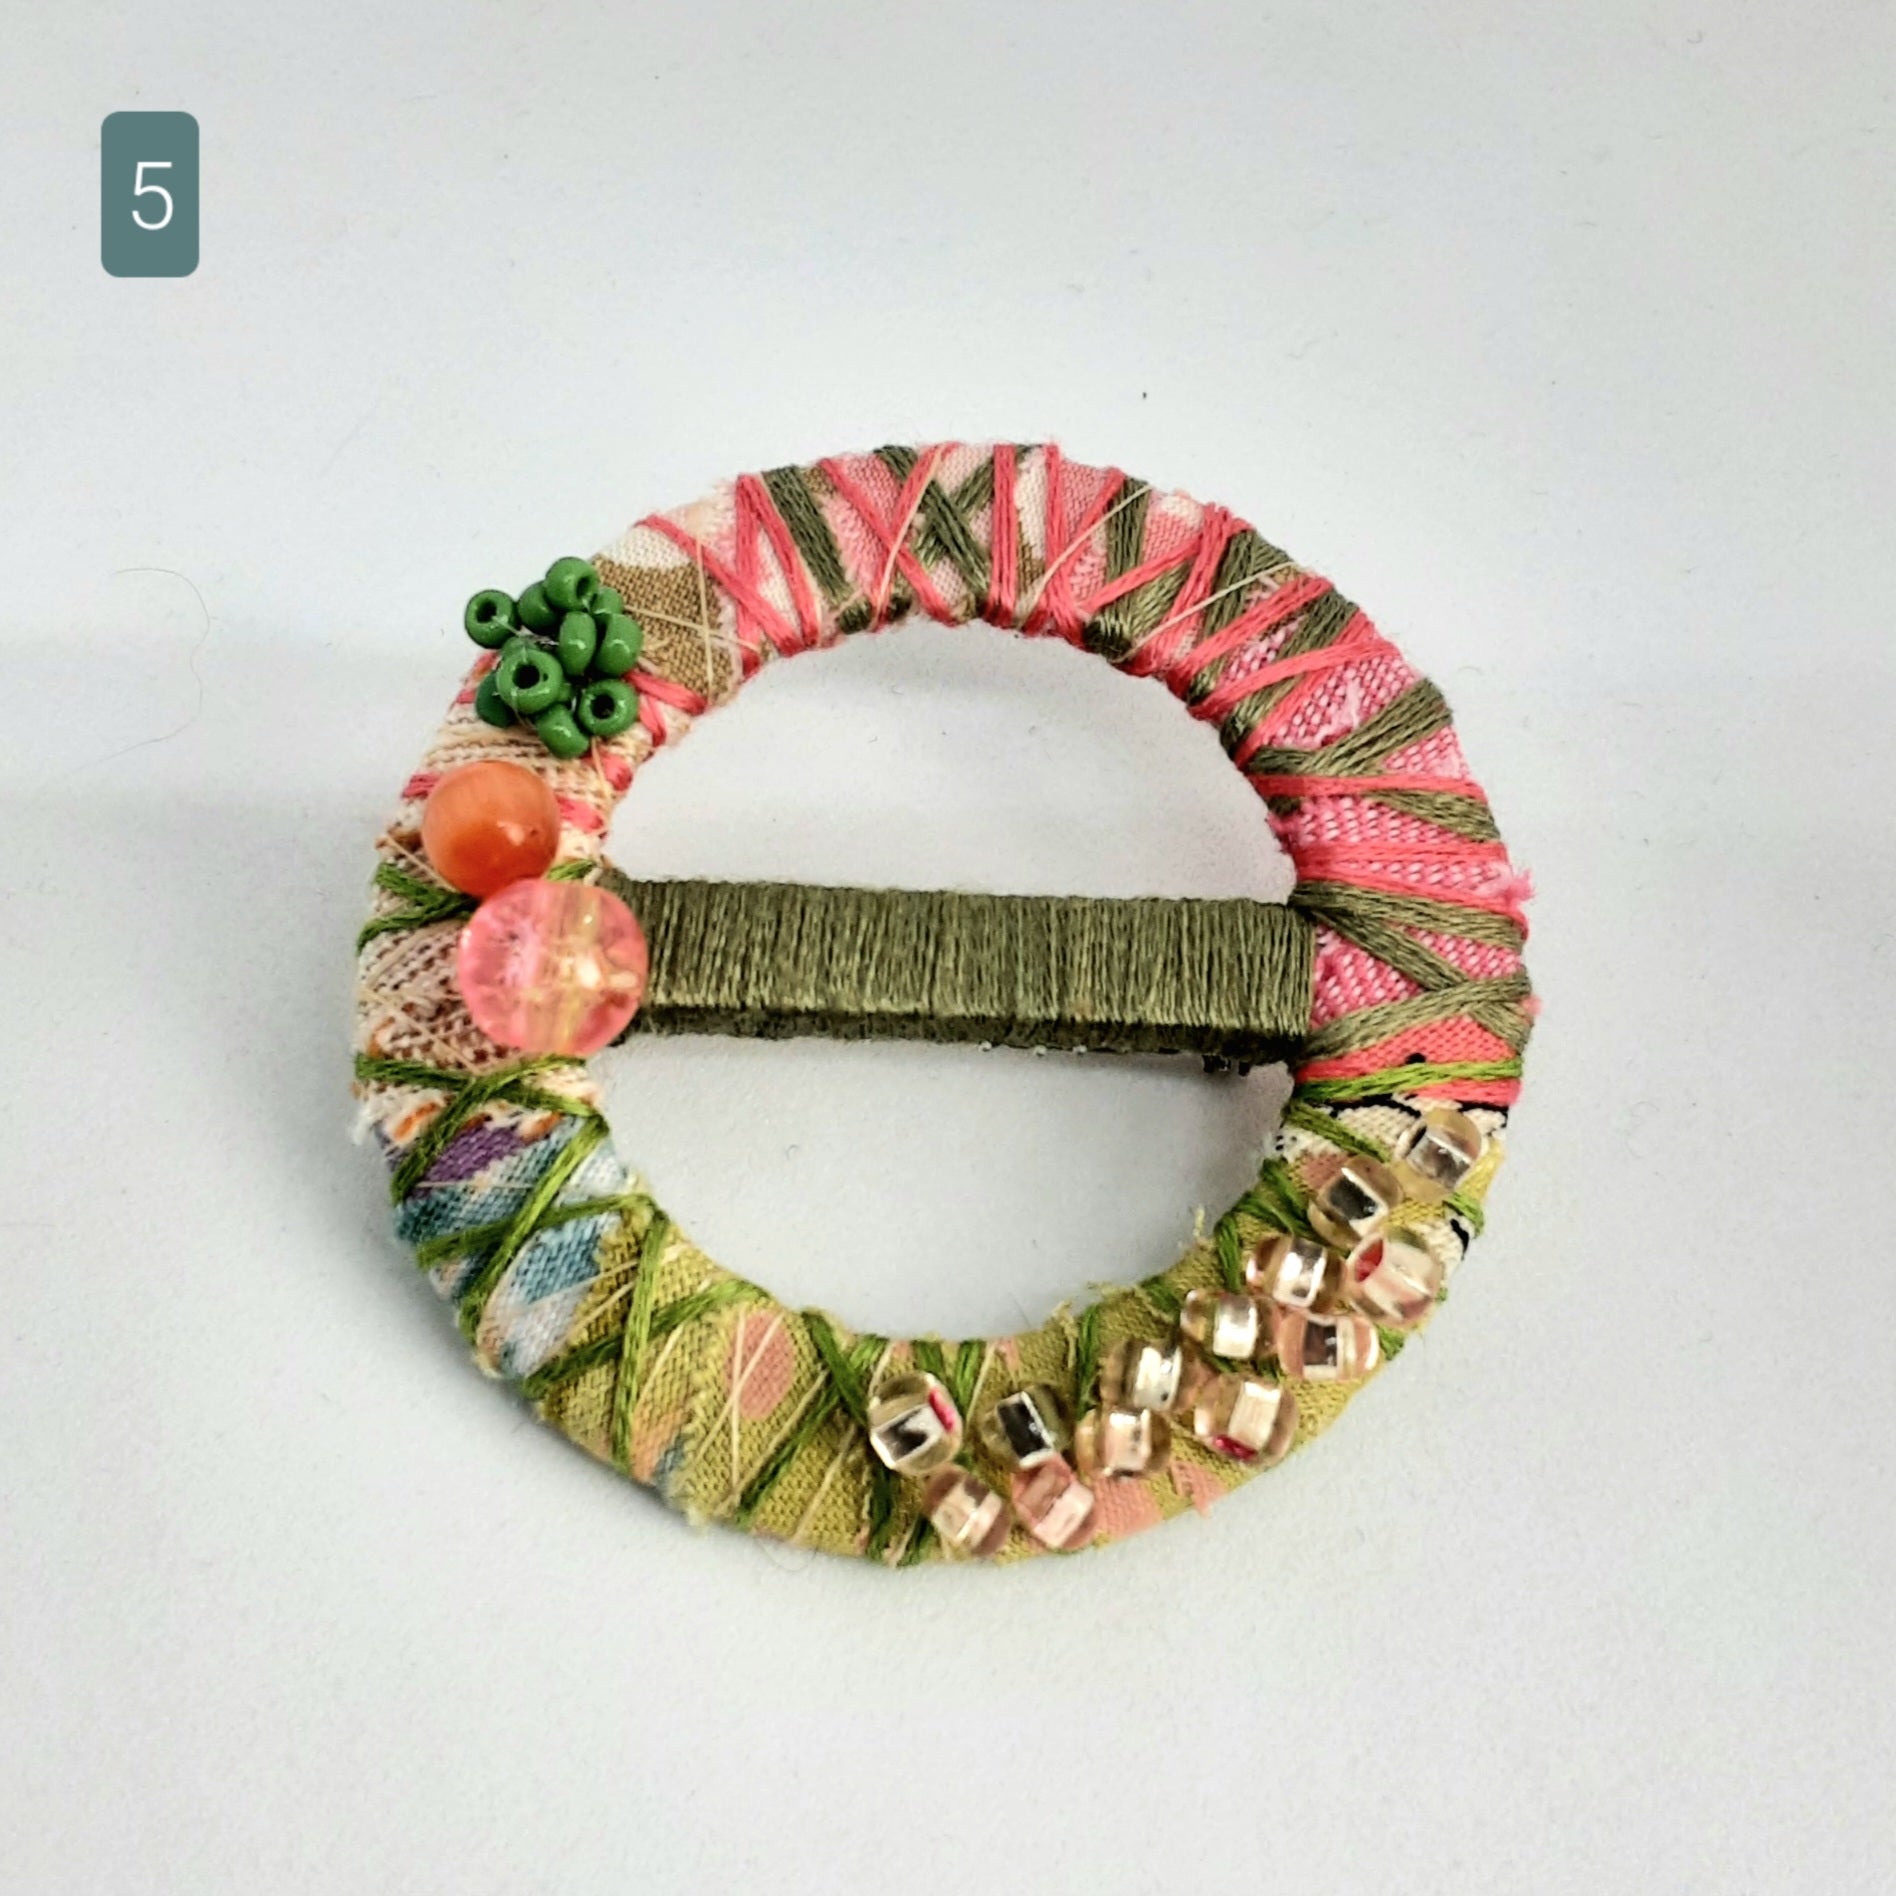 Circular statement textile brooch with bead embellishments on a white background